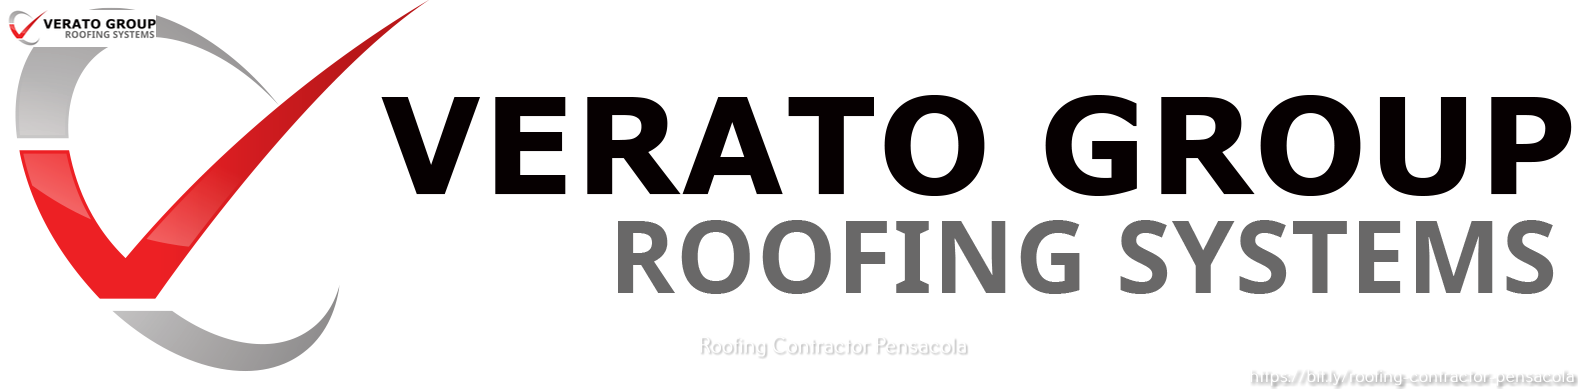 Verato Roofing Offers Top-Notch Roofing Solutions in Pensacola FL